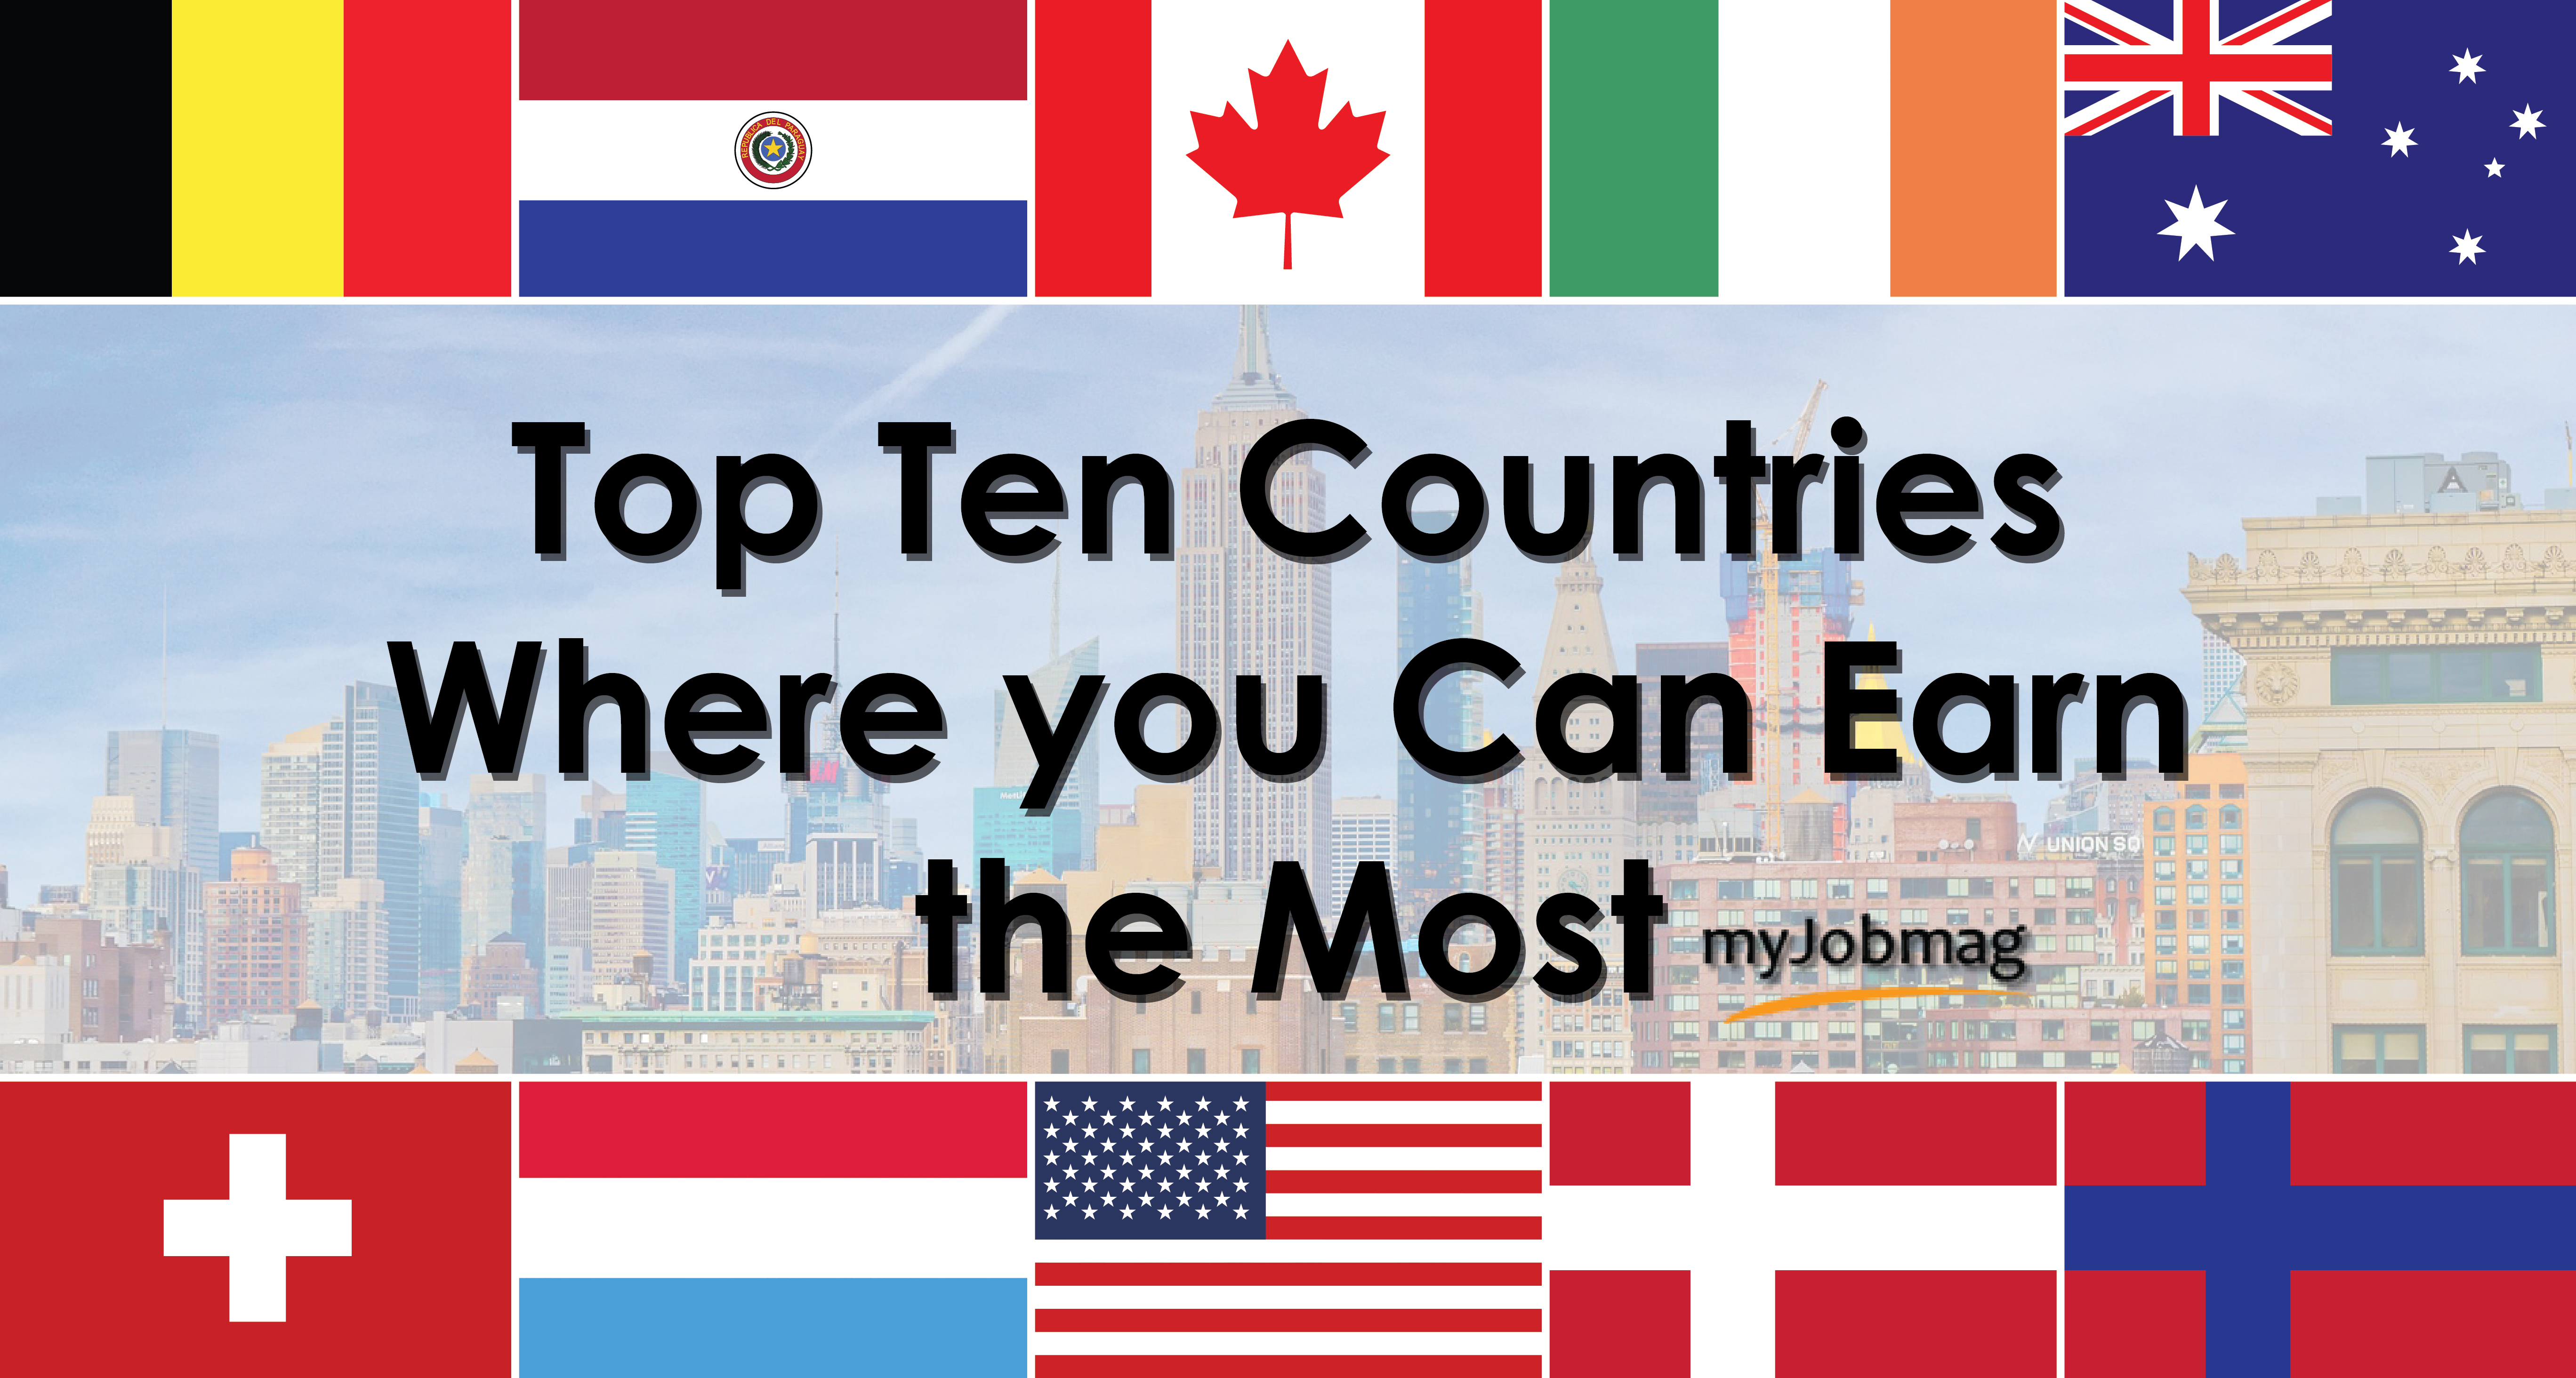 Top 10 Countries Where You Can Earn the Most